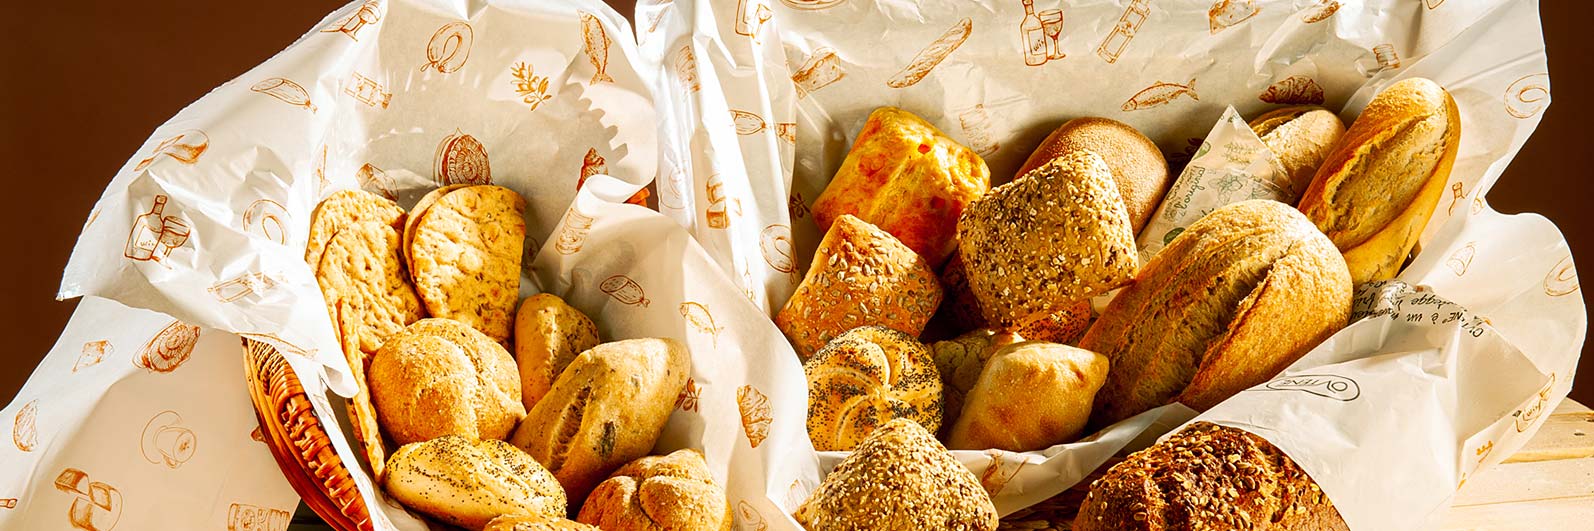 UK Suppliers of Eco-Friendly Bakery Packaging Solutions